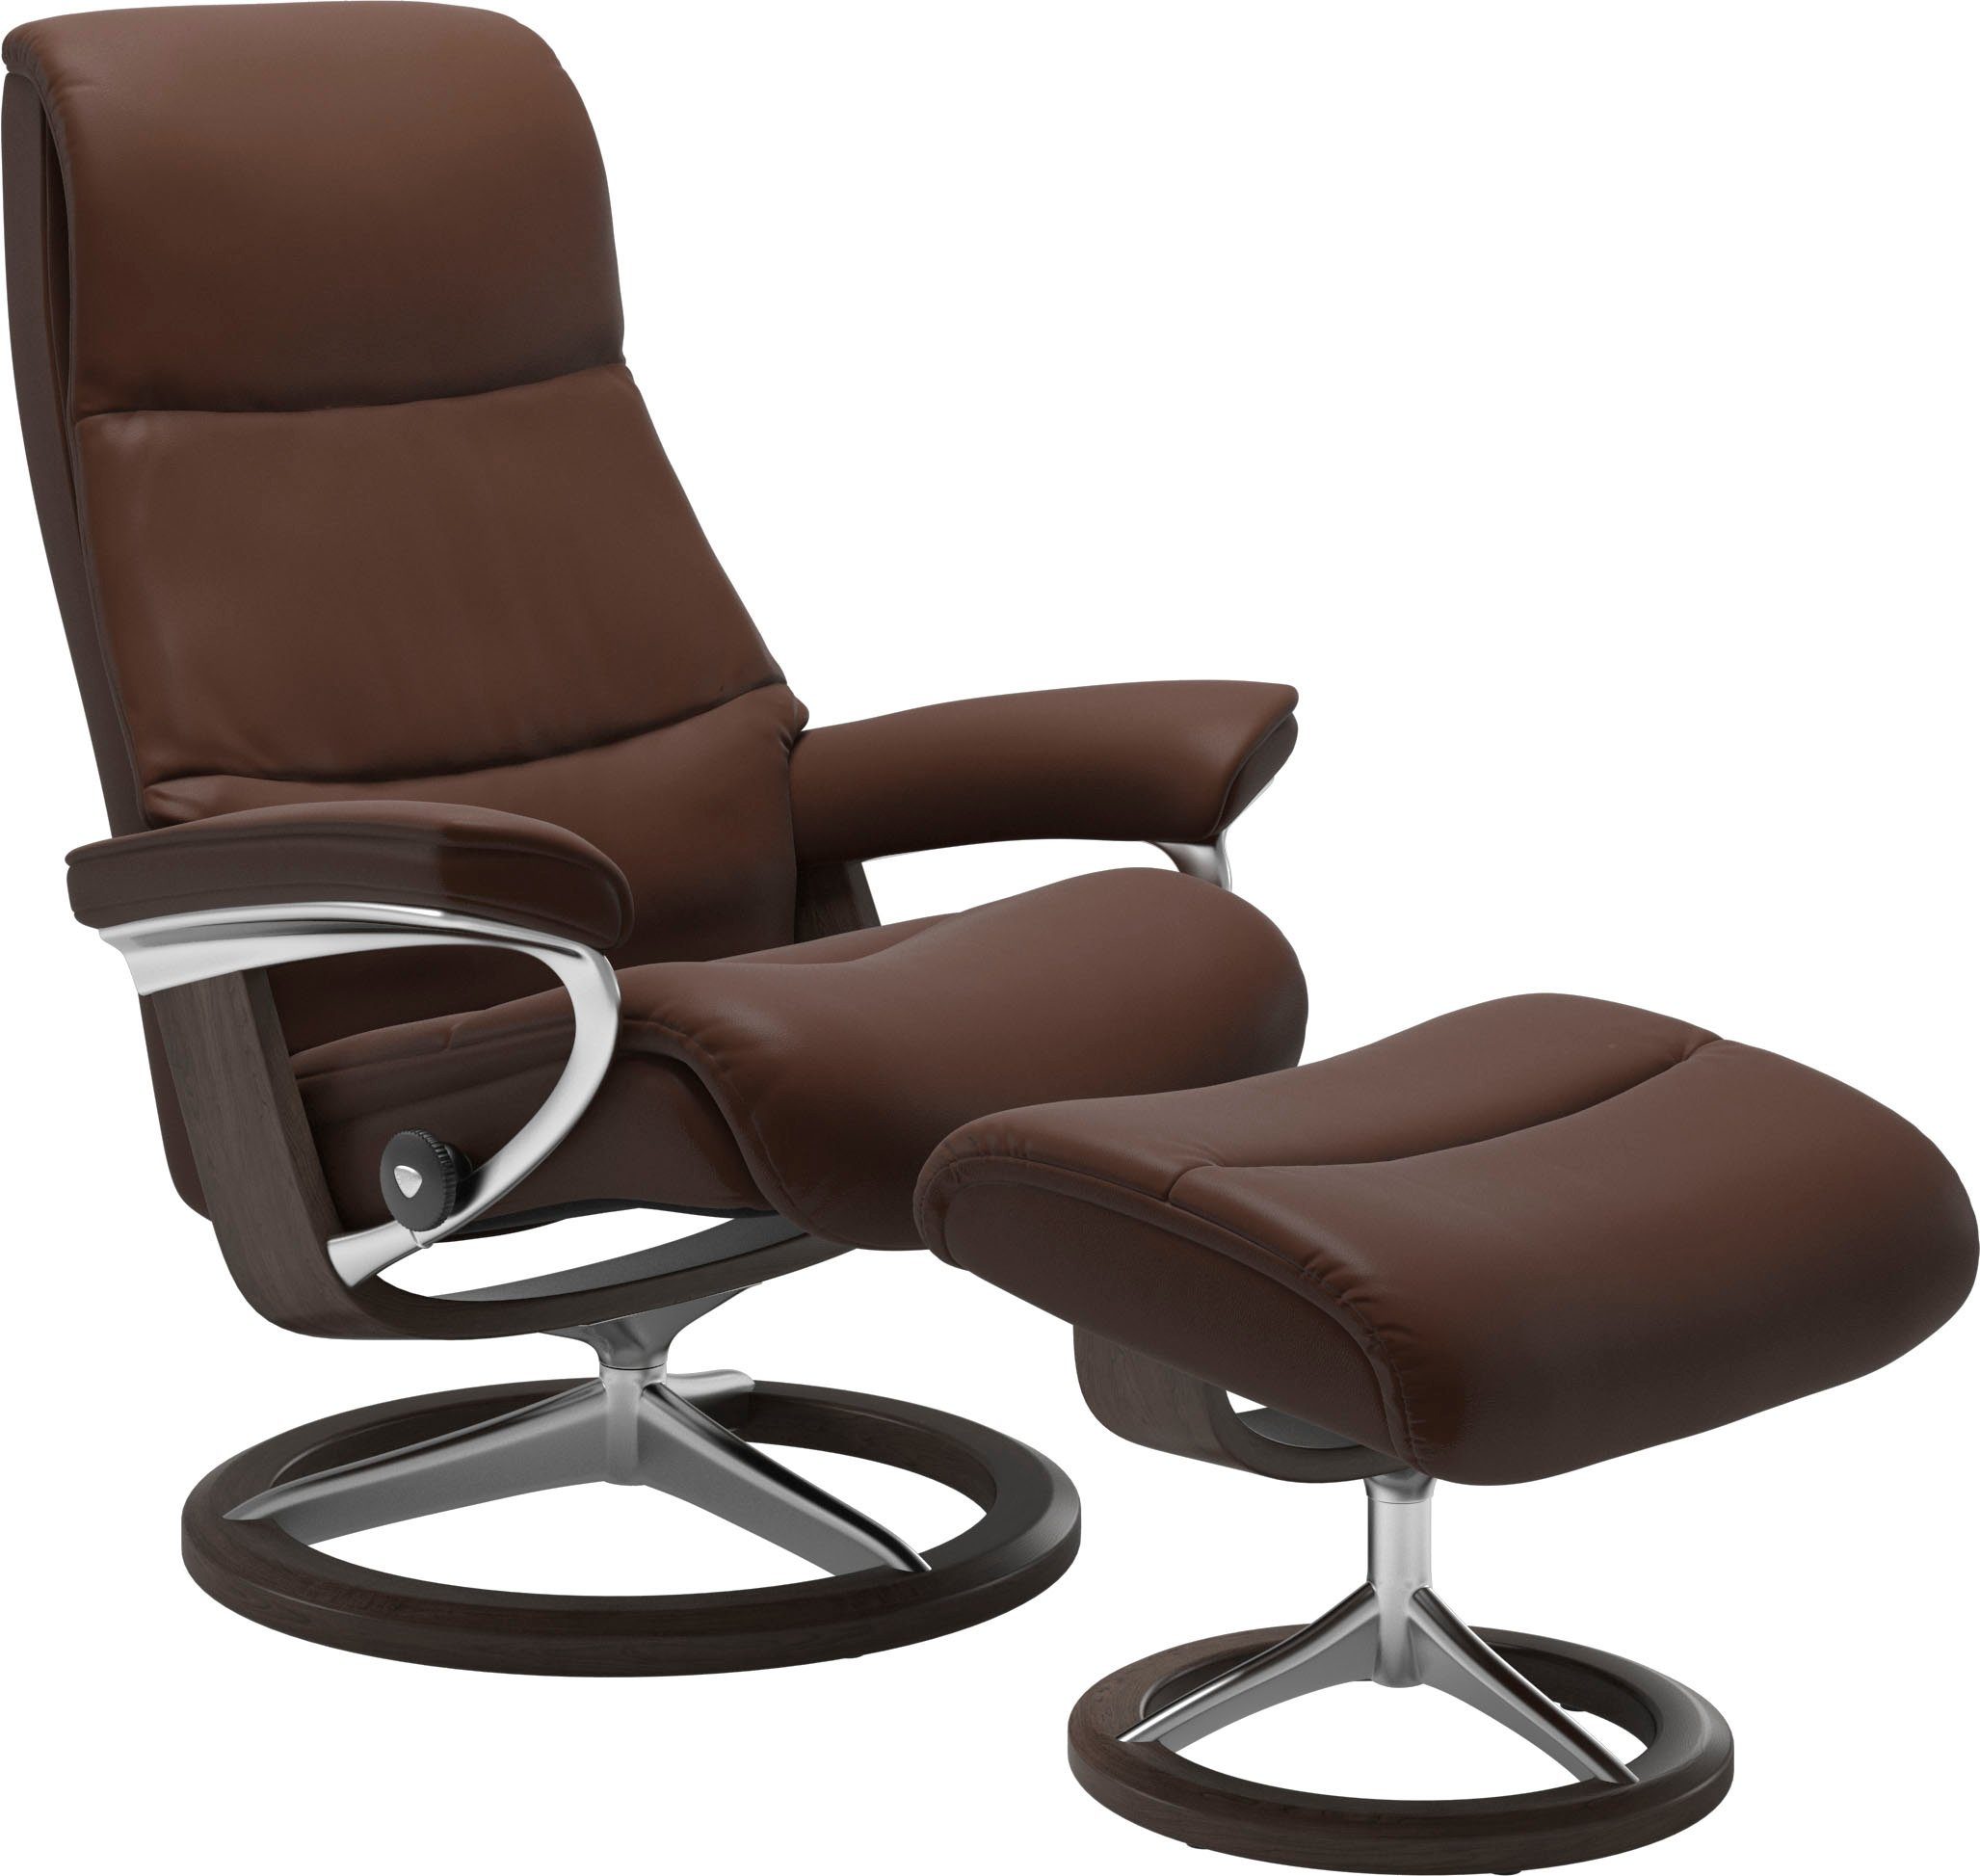 Stressless® Relaxsessel View, mit Signature Base, Größe M,Gestell Wenge | Funktionssessel